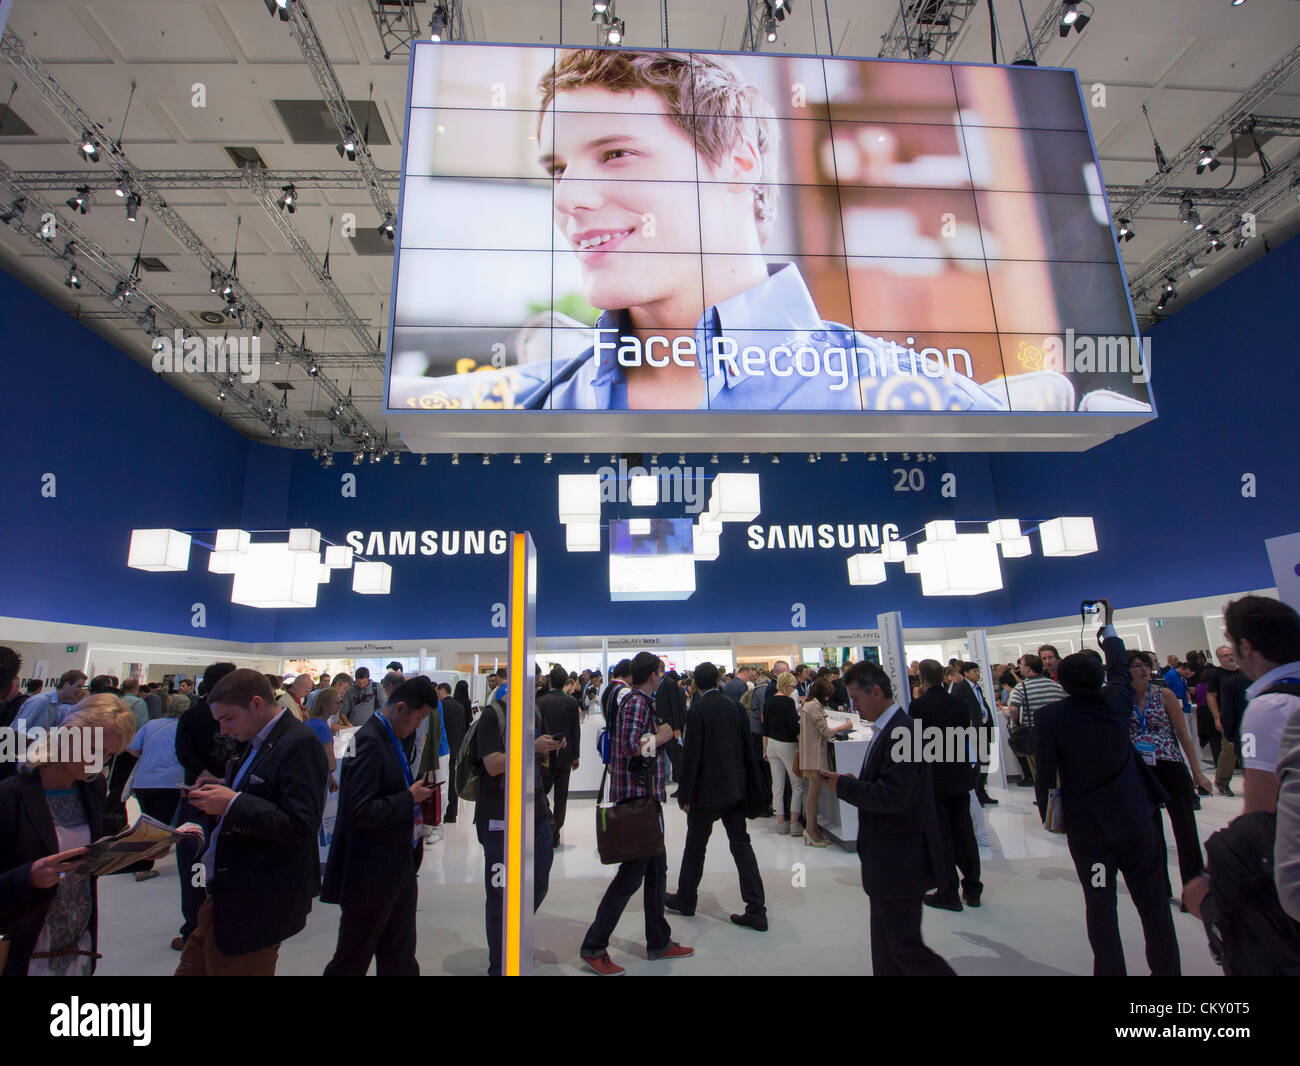 Crowded Samsung hall on Friday 31 August 2012, the opening day of the annual IFA (or Internationale Funkausstellung ) consumer electronics and electrical products show held in Berlin Messe Trade Show Halls Germany. Stock Photo